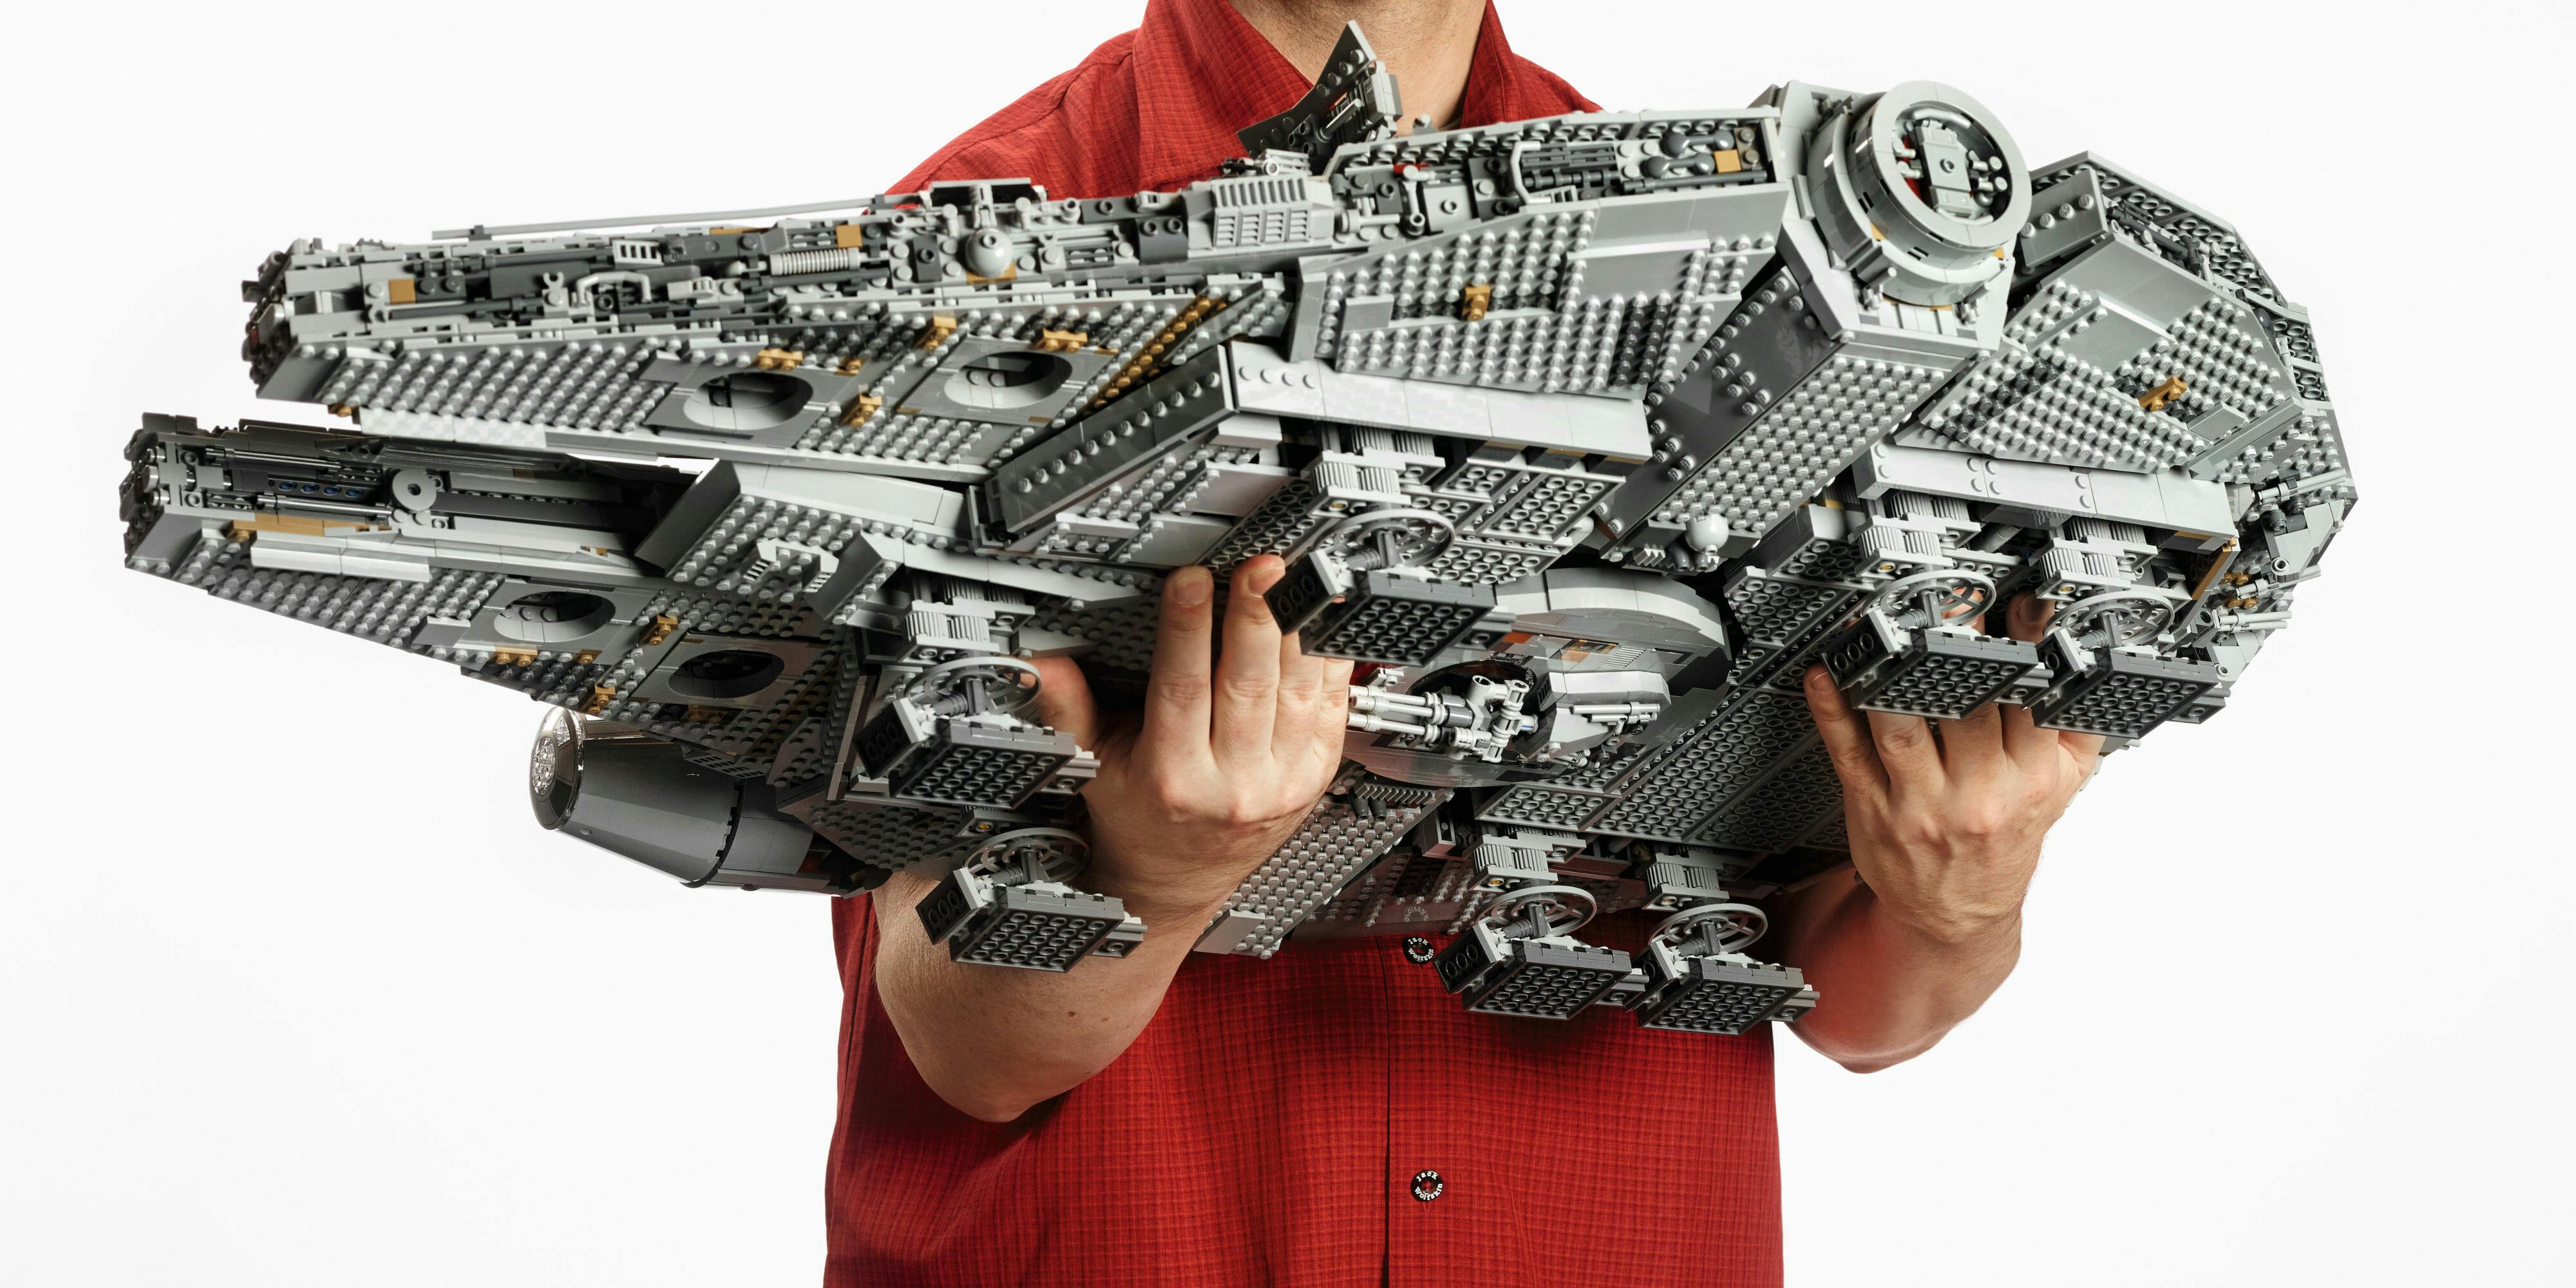 Lego's New Ultimate Collector Series Millennium Falcon May Be the Biggest Lego Ever